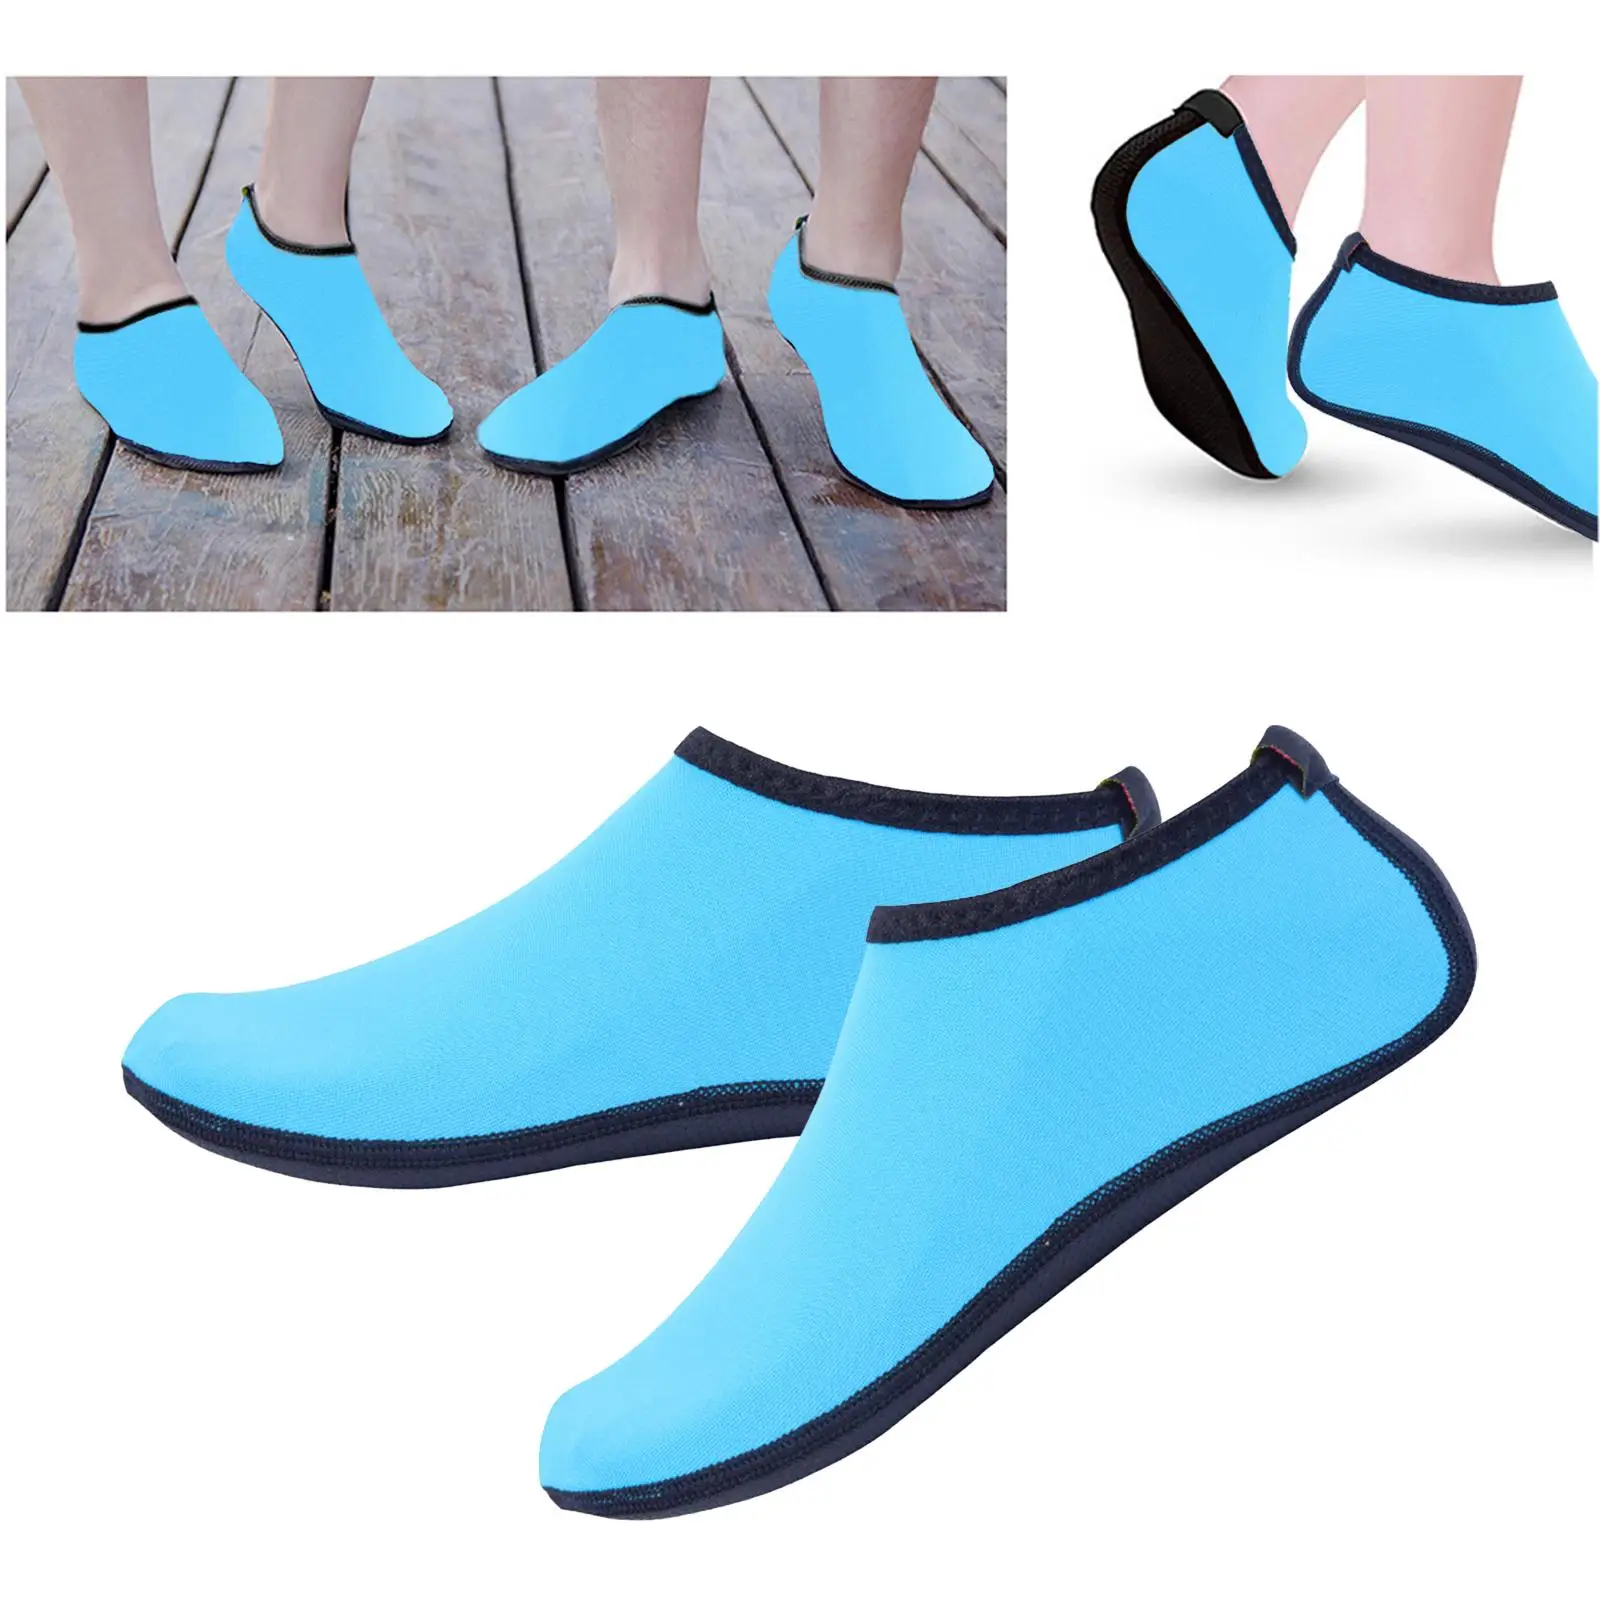 Dive Socks Aqua Water Socks Quick Dry for Beach Trip, Boating, Kayaking, Snorkeling, Beach Volleyball, Water Park Activities